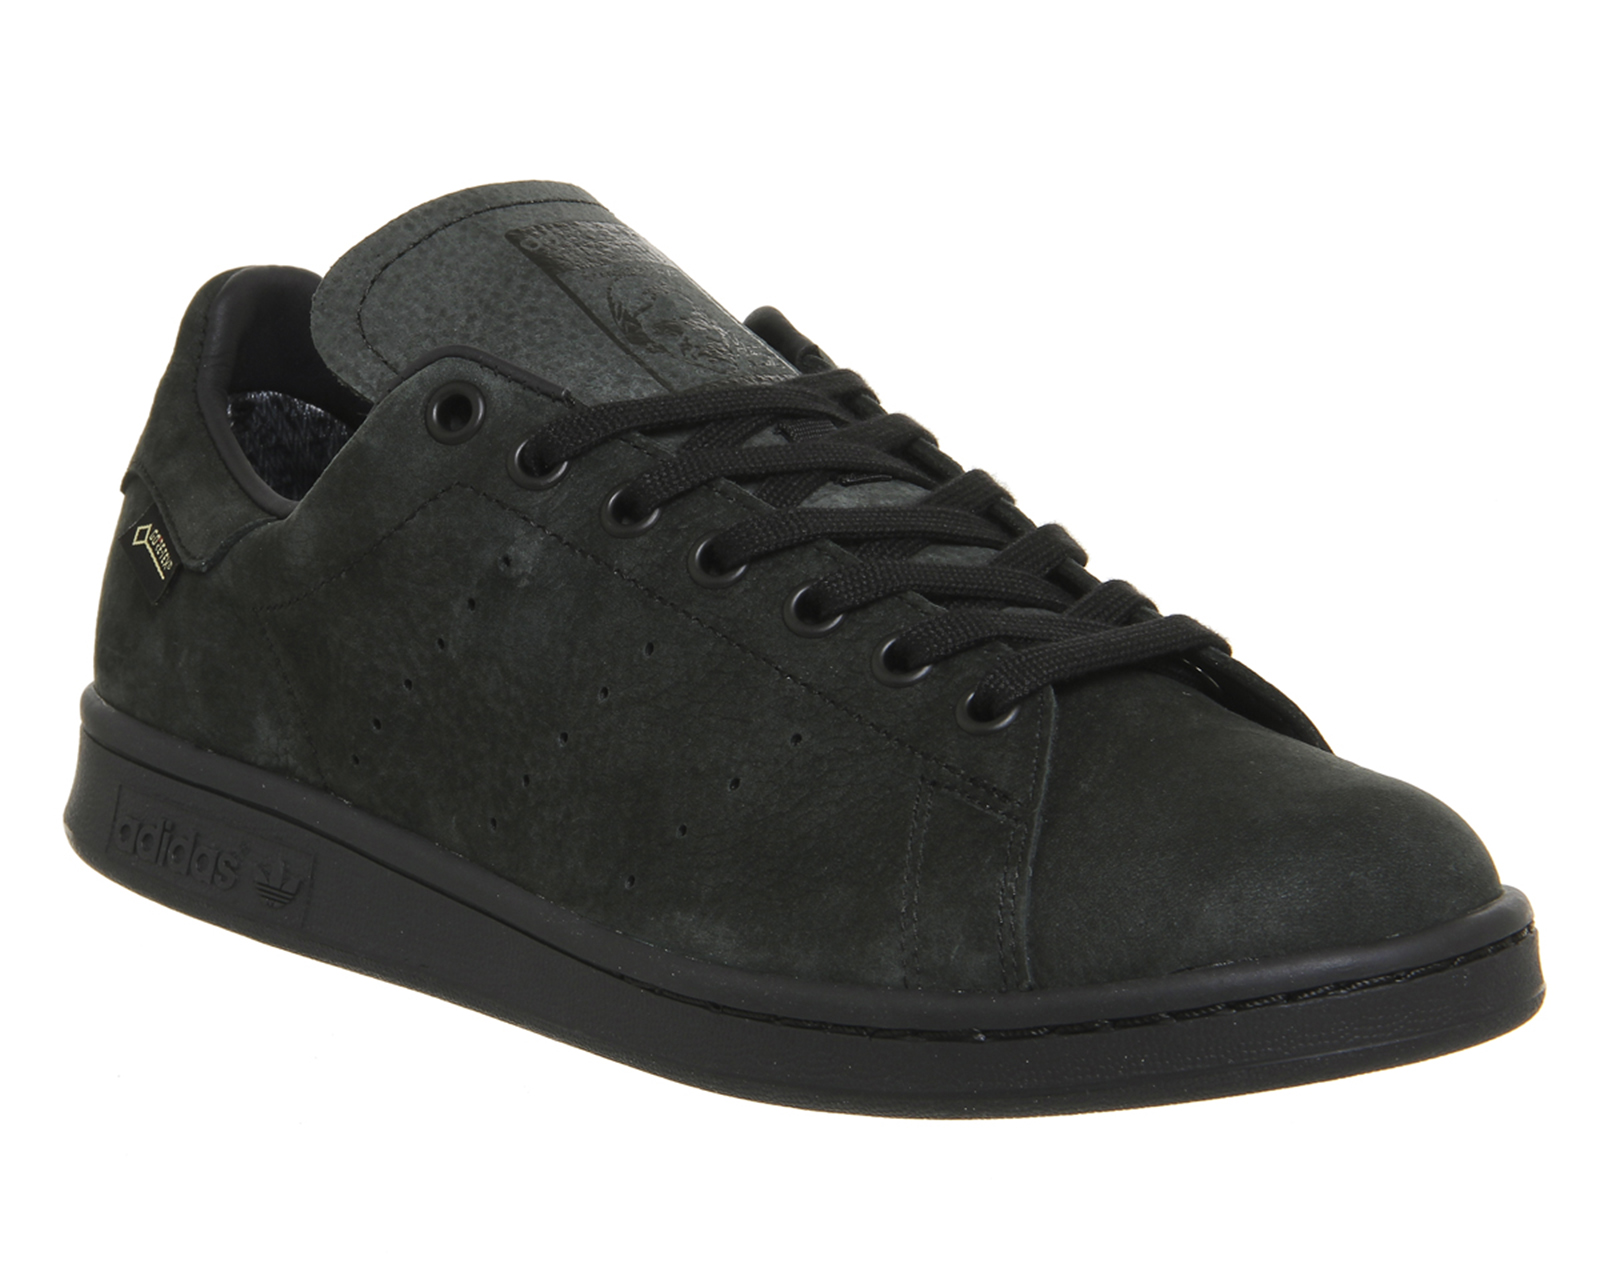 adidas Stan Smith Core Black Gtx - His trainers